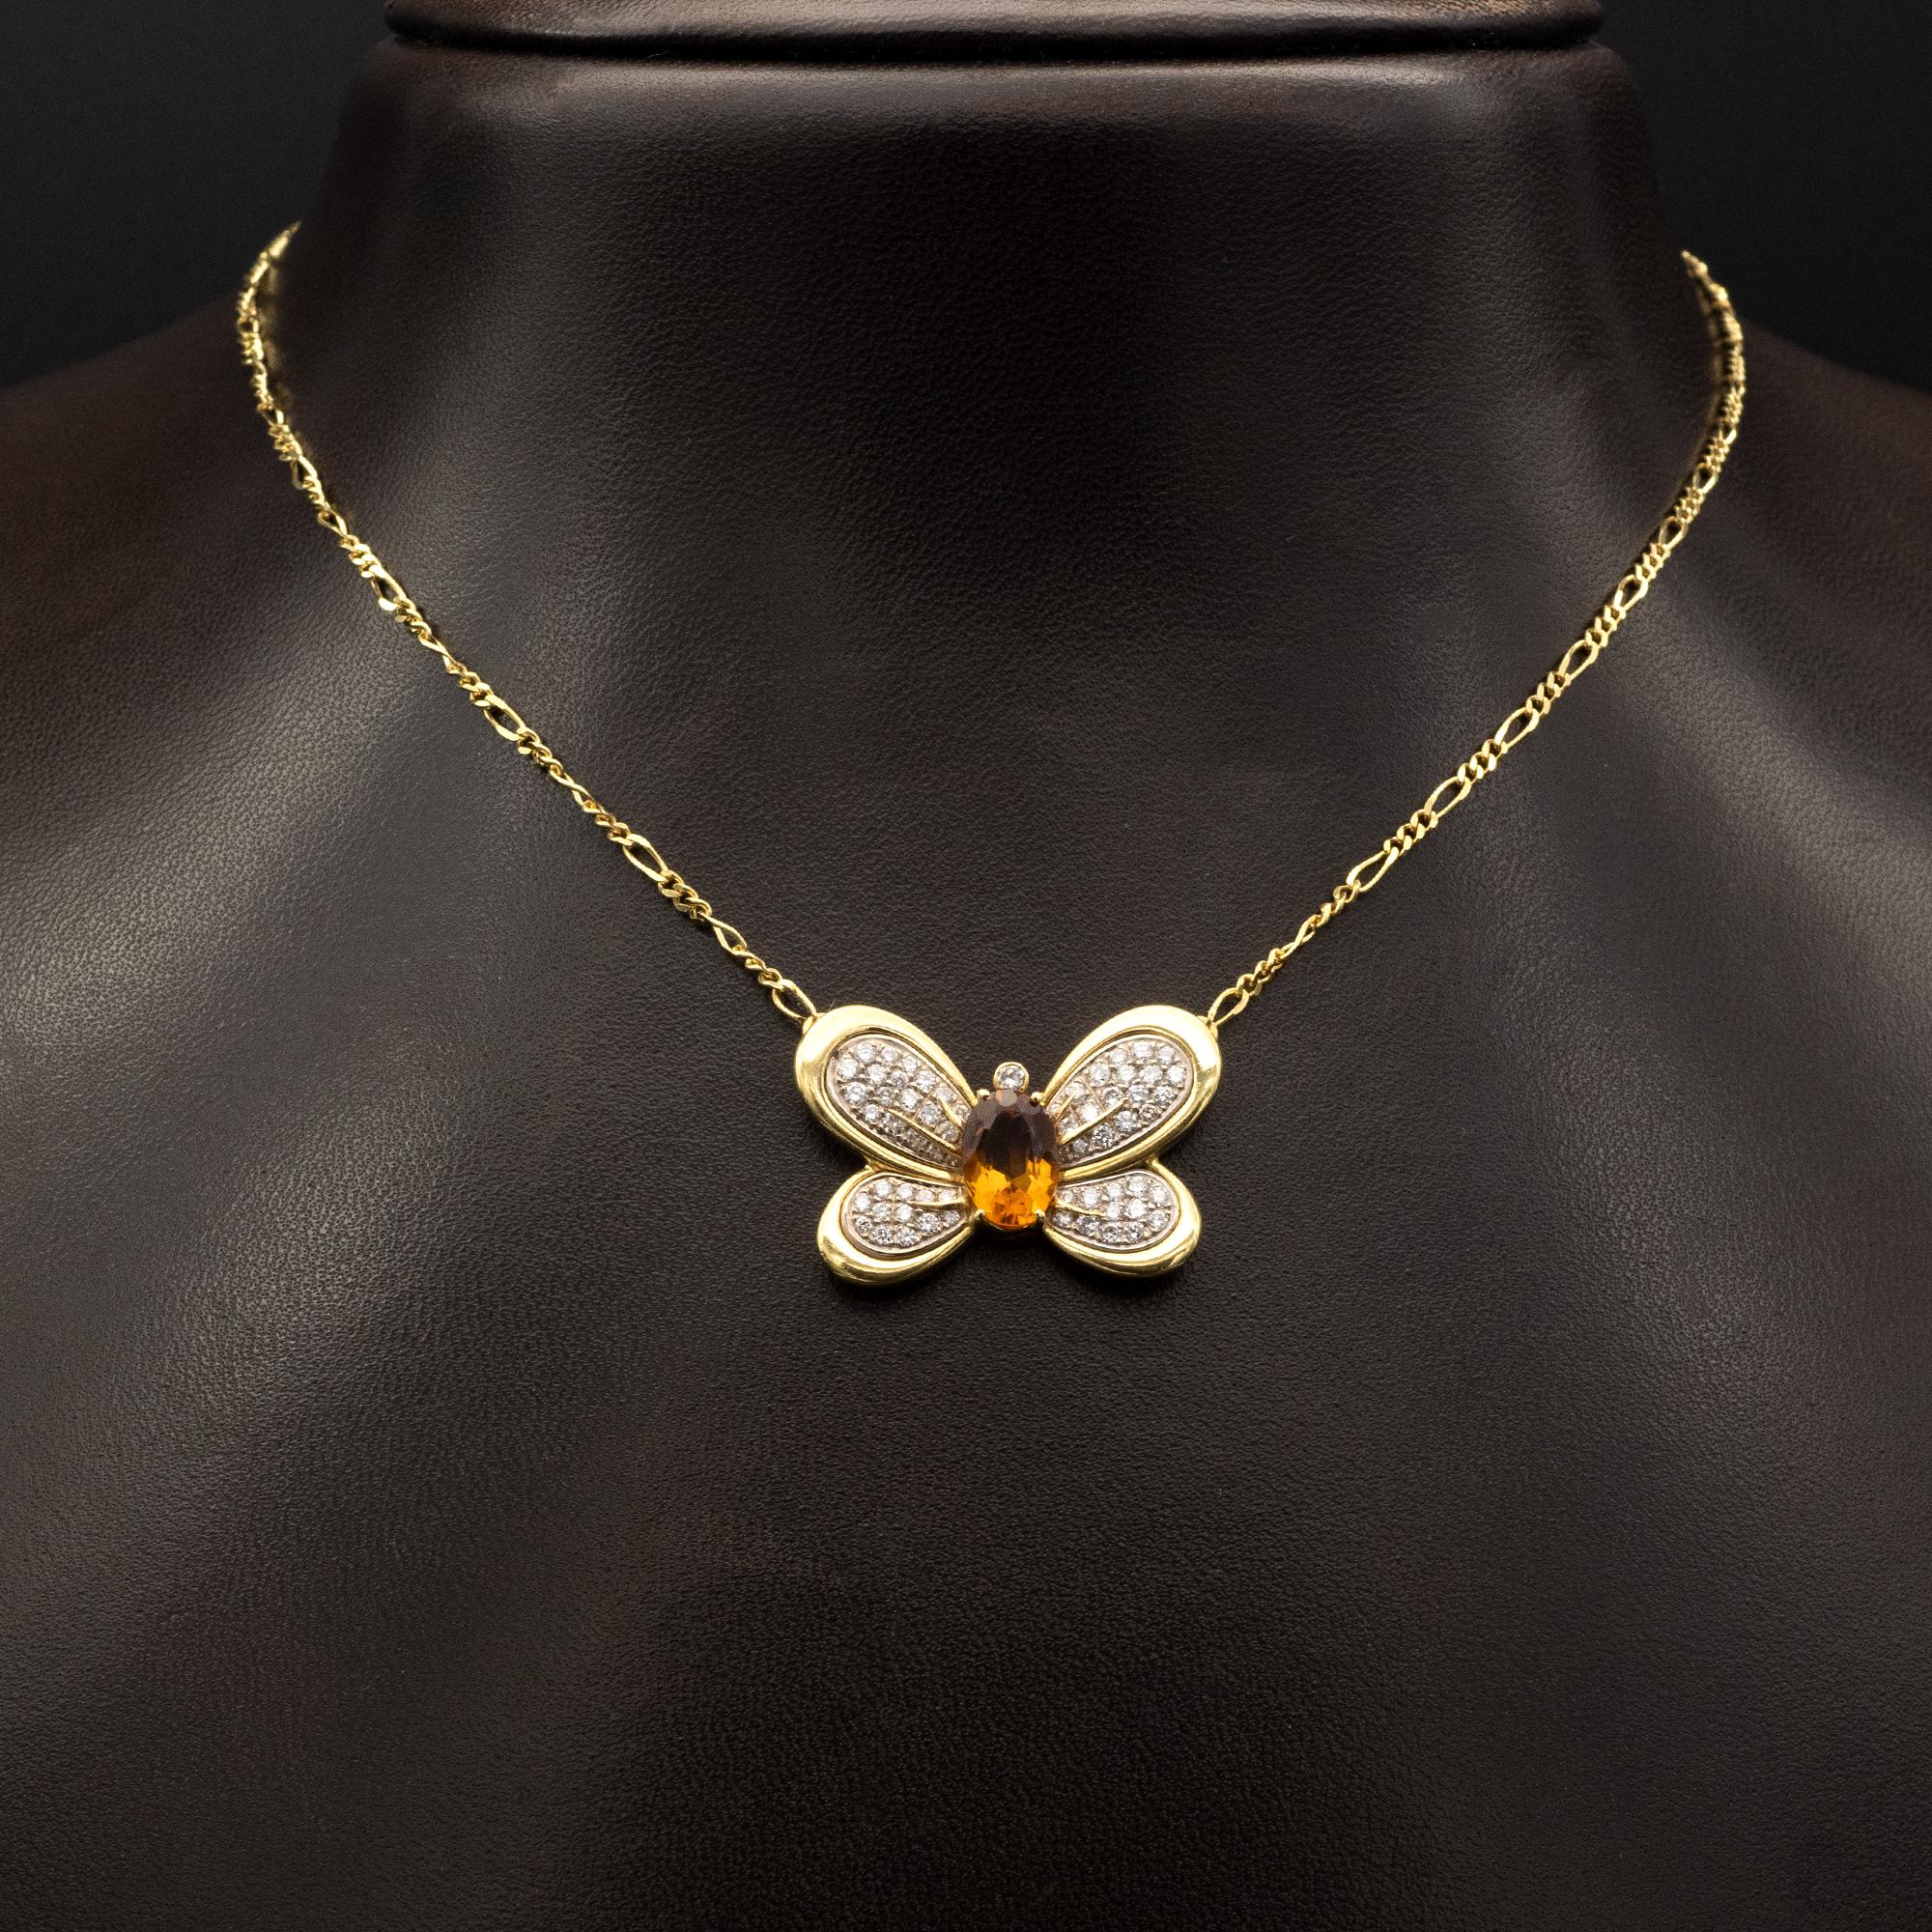 Exquisite butterfly necklace: citrine, pavé set diamonds on white gold inlayed in a yellow gold frame. Very refined work with great attention to details.

